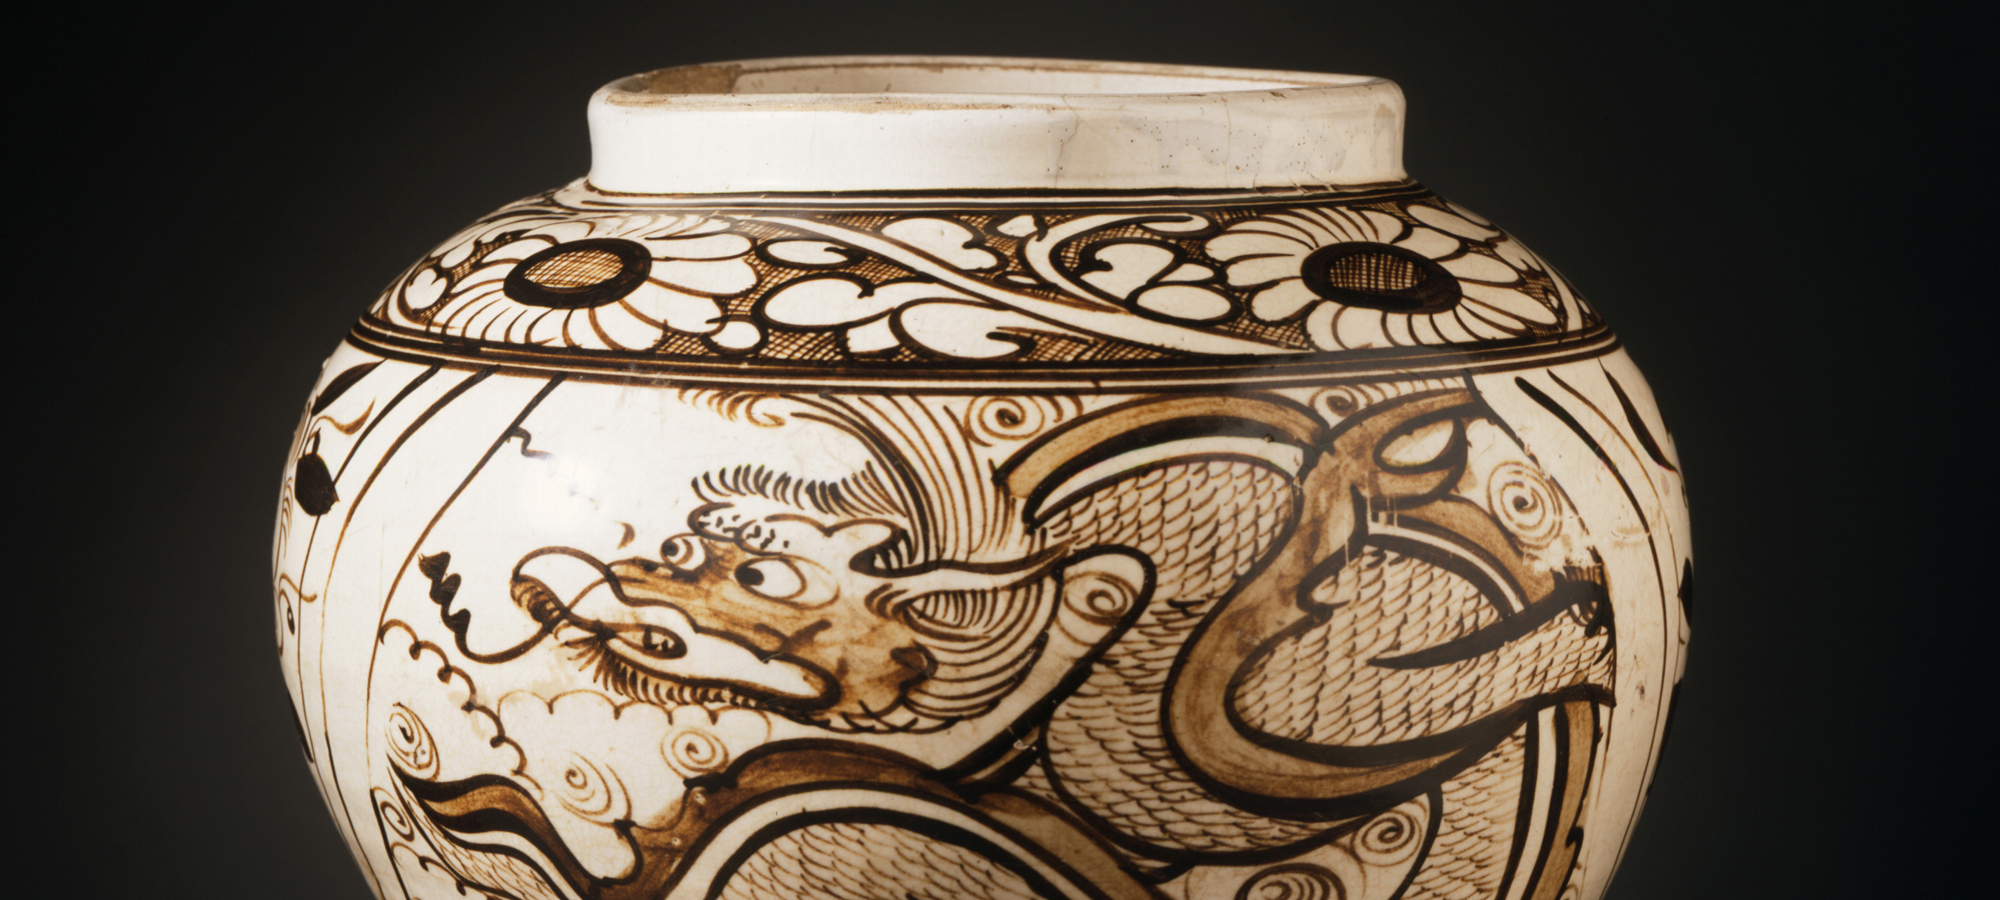 vincent-price-art-museum-exhibitions-chinese-ceramics-from-the-los